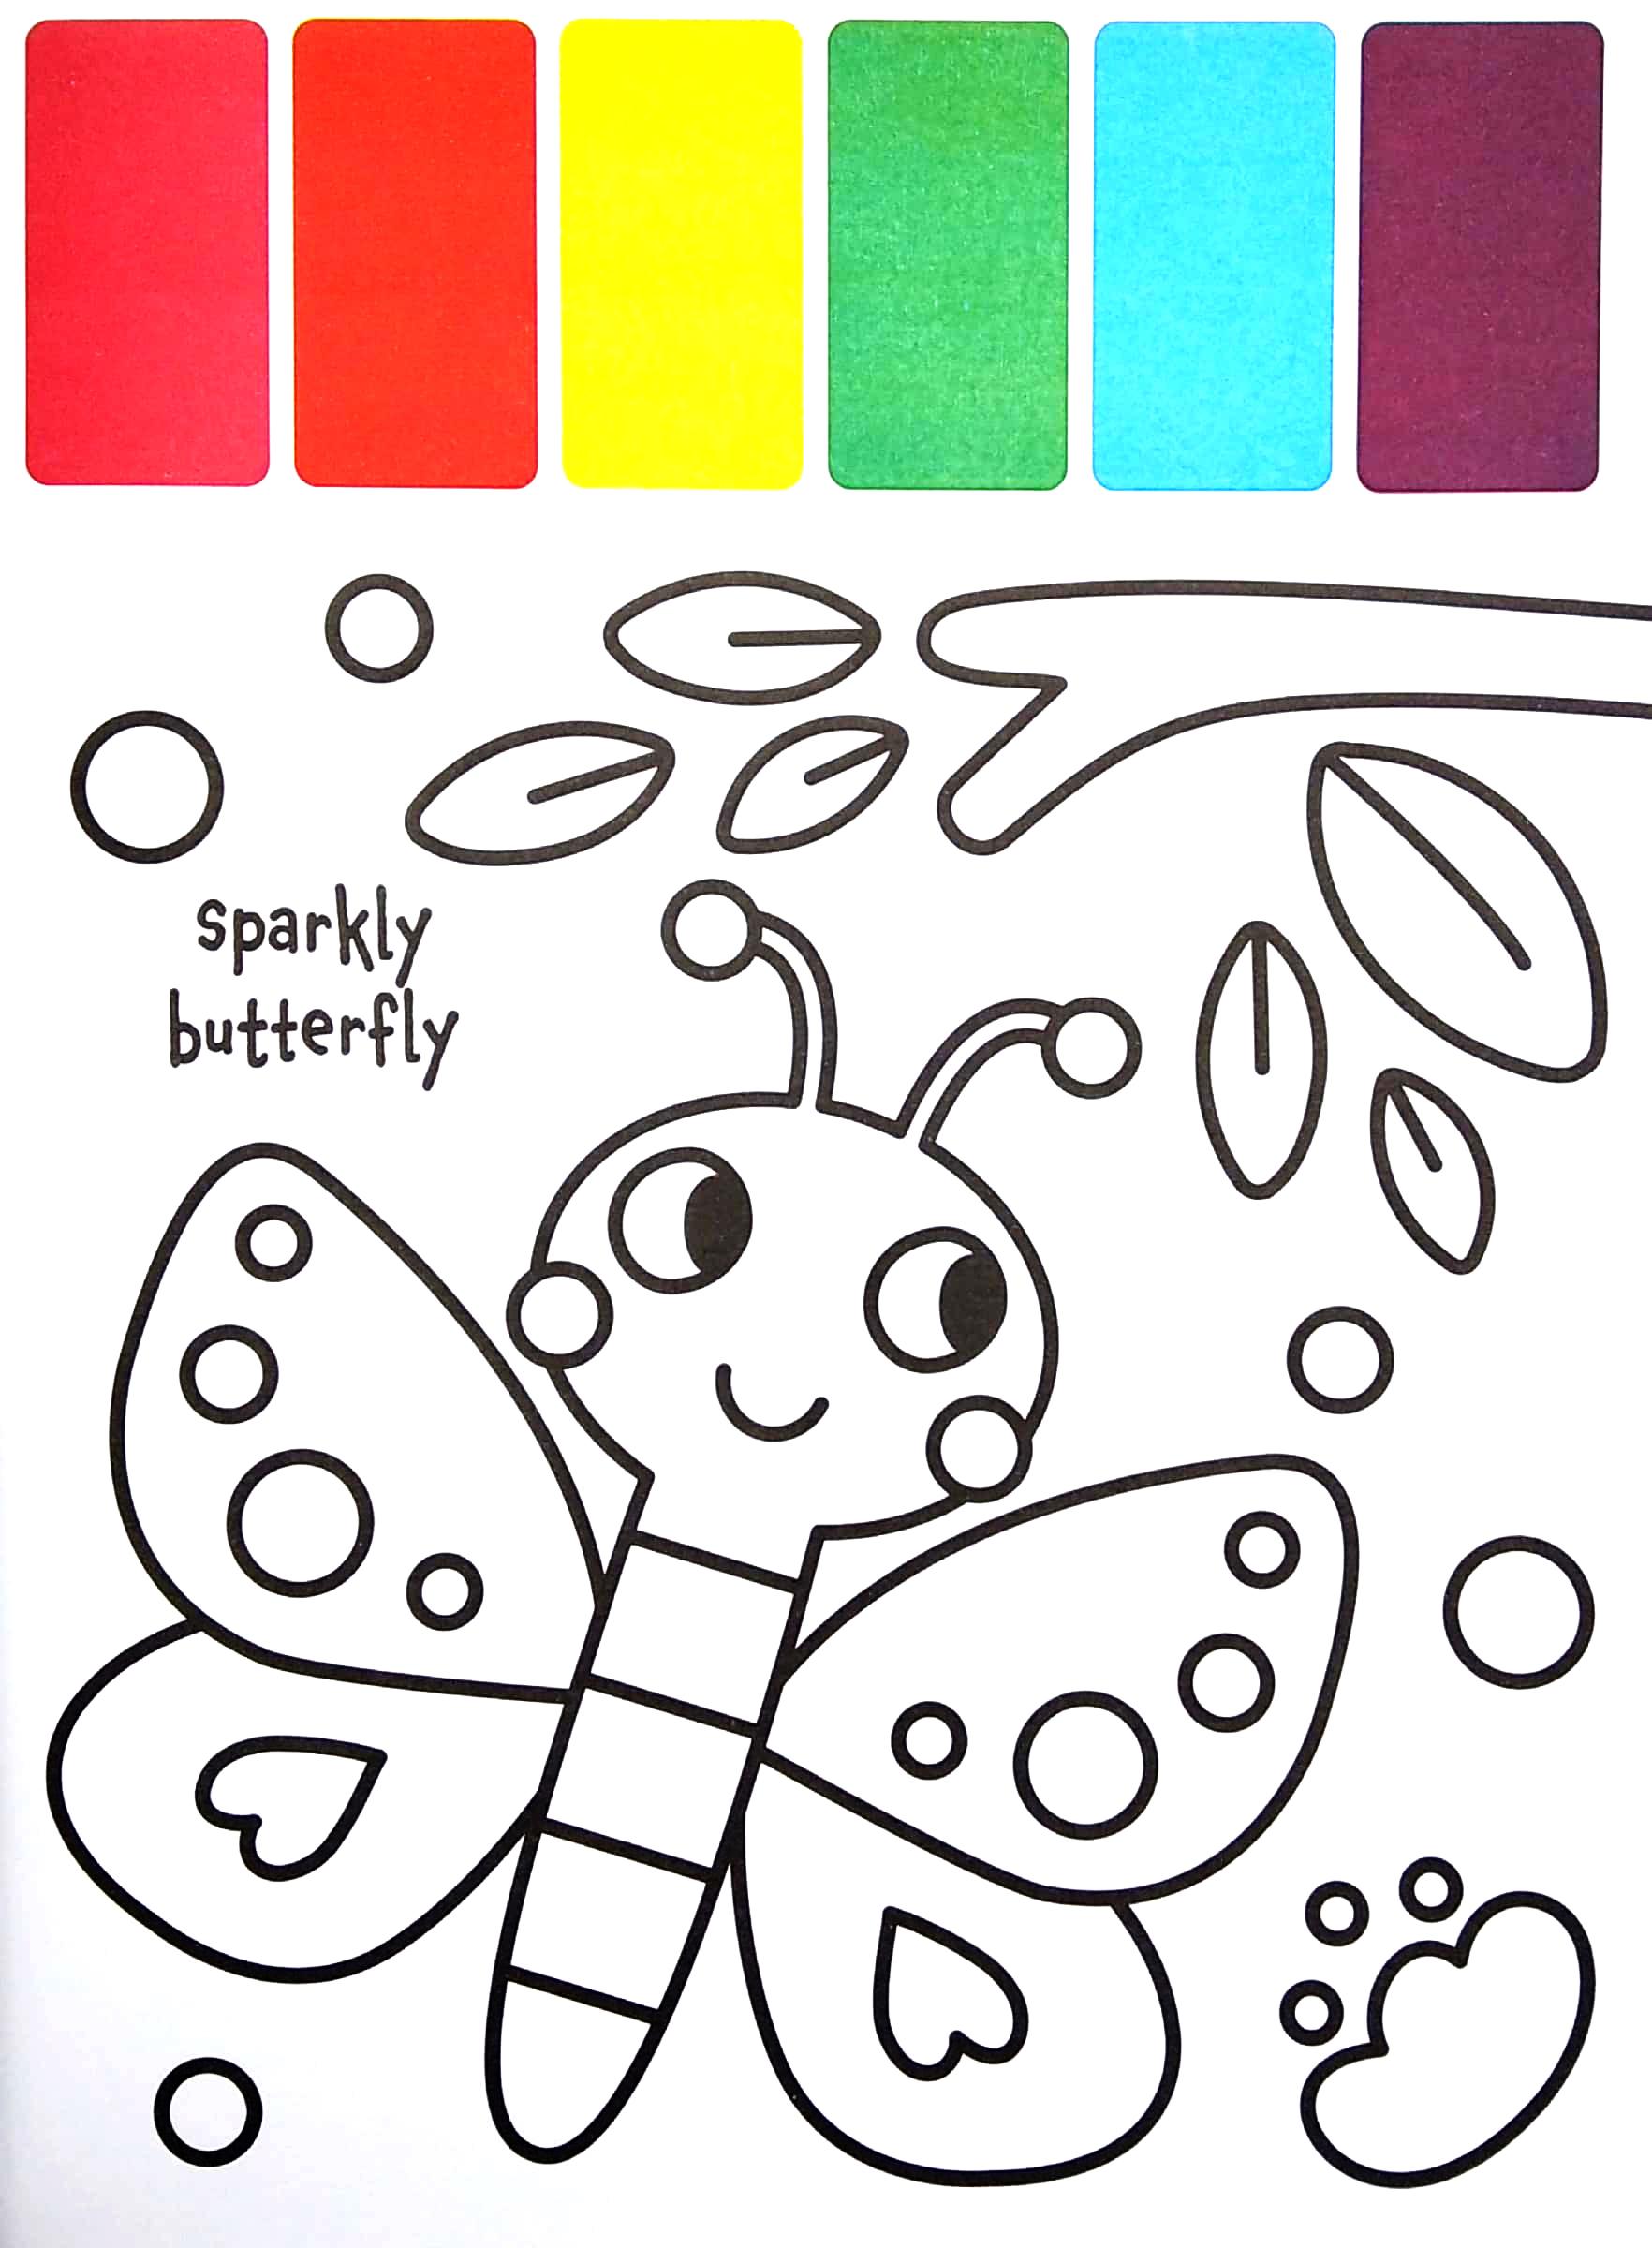 My First Paint Palette: Bugs